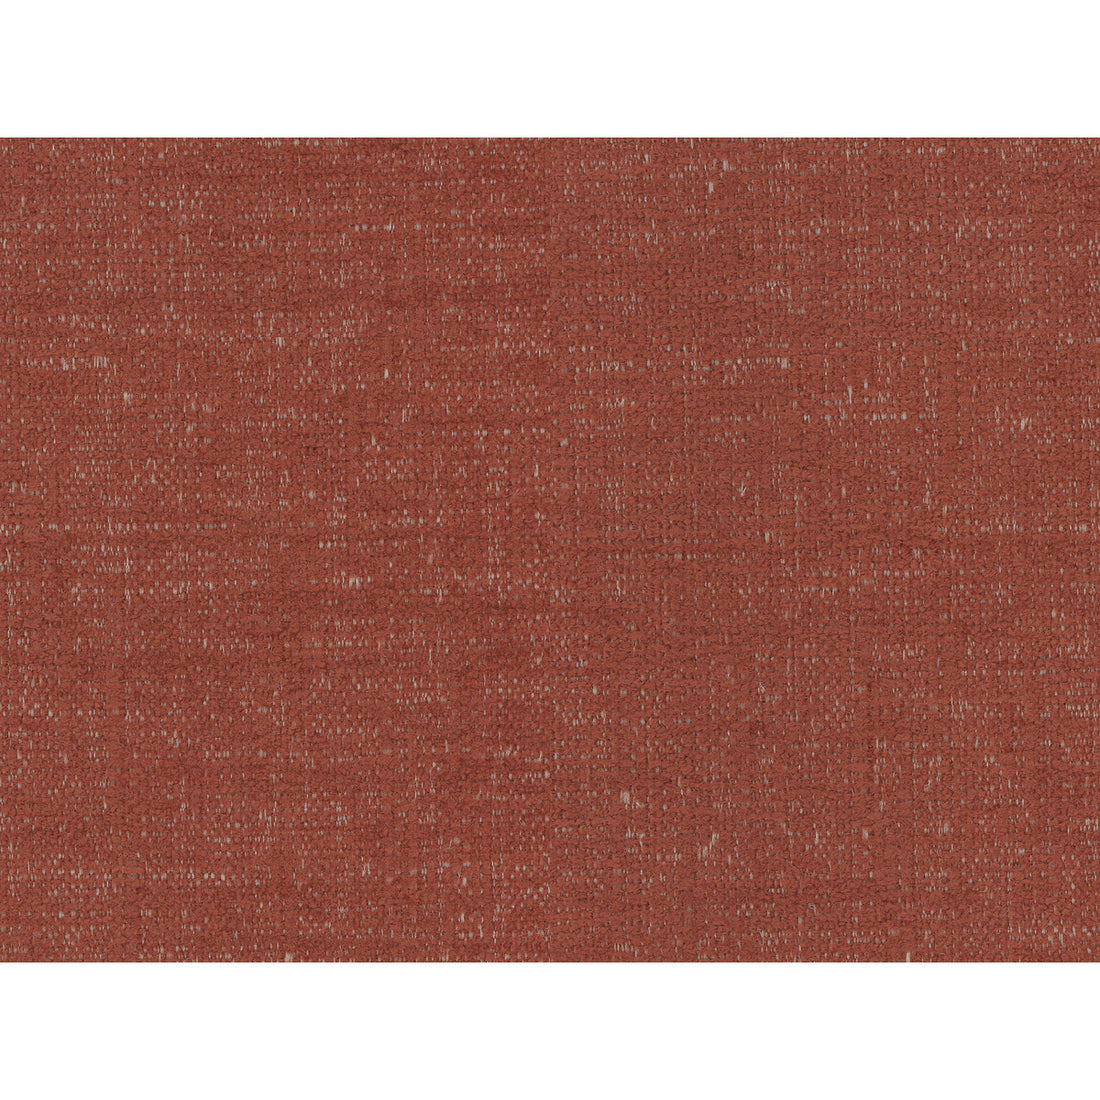 Kravet Smart fabric in 34622-24 color - pattern 34622.24.0 - by Kravet Smart in the Performance Crypton Home collection